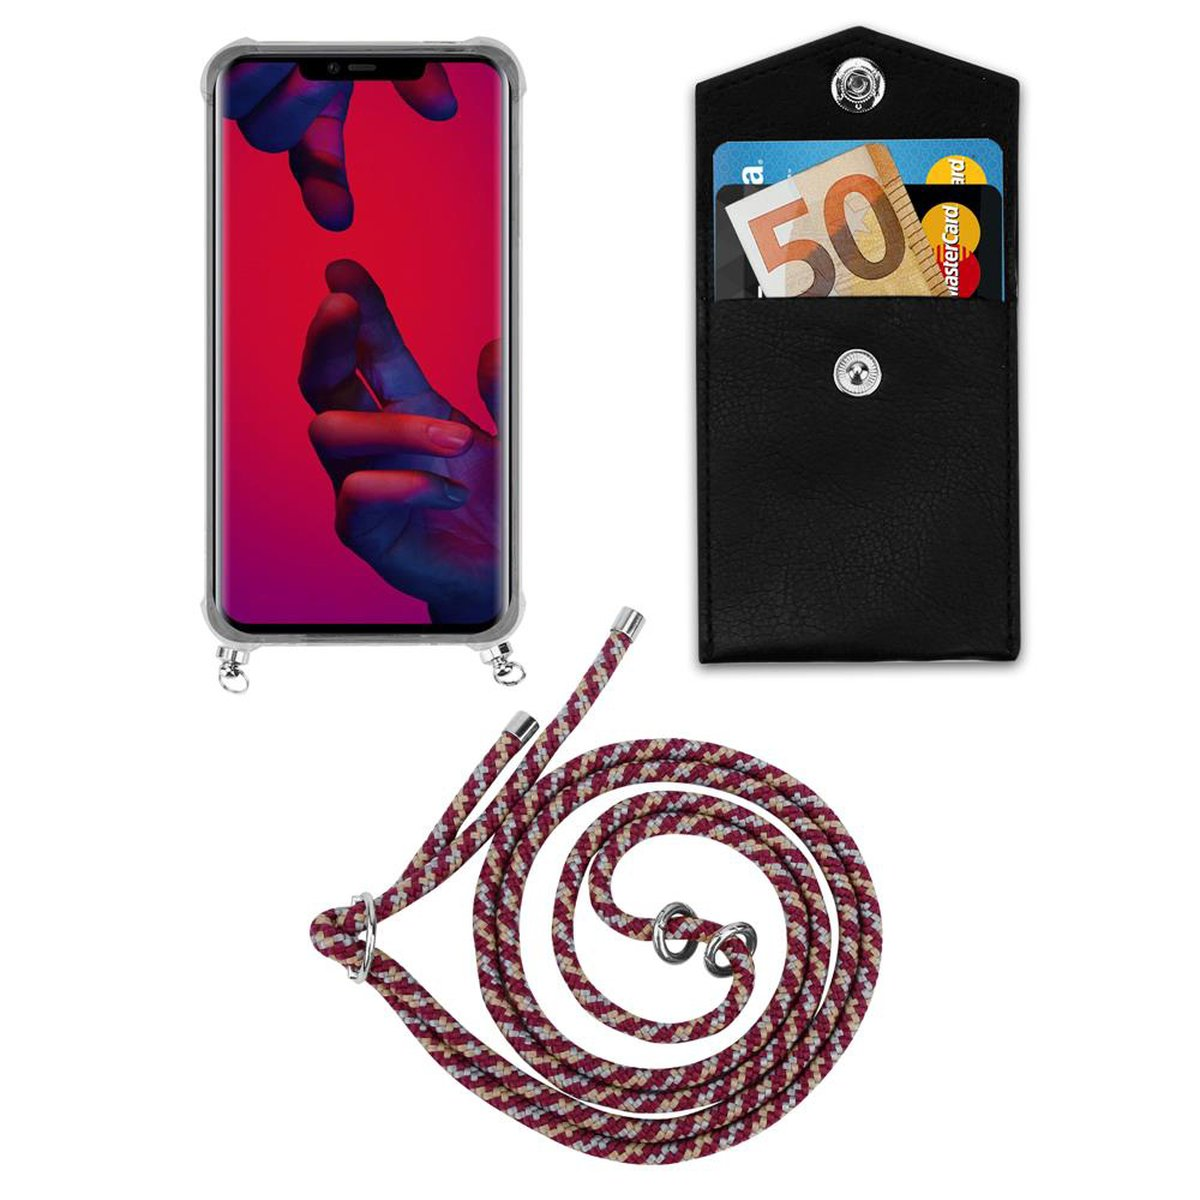 und 20 Backcover, GELB Huawei, MATE PRO, ROT Kette Kordel abnehmbarer Hülle, mit Silber CADORABO Ringen, Handy WEIß Band